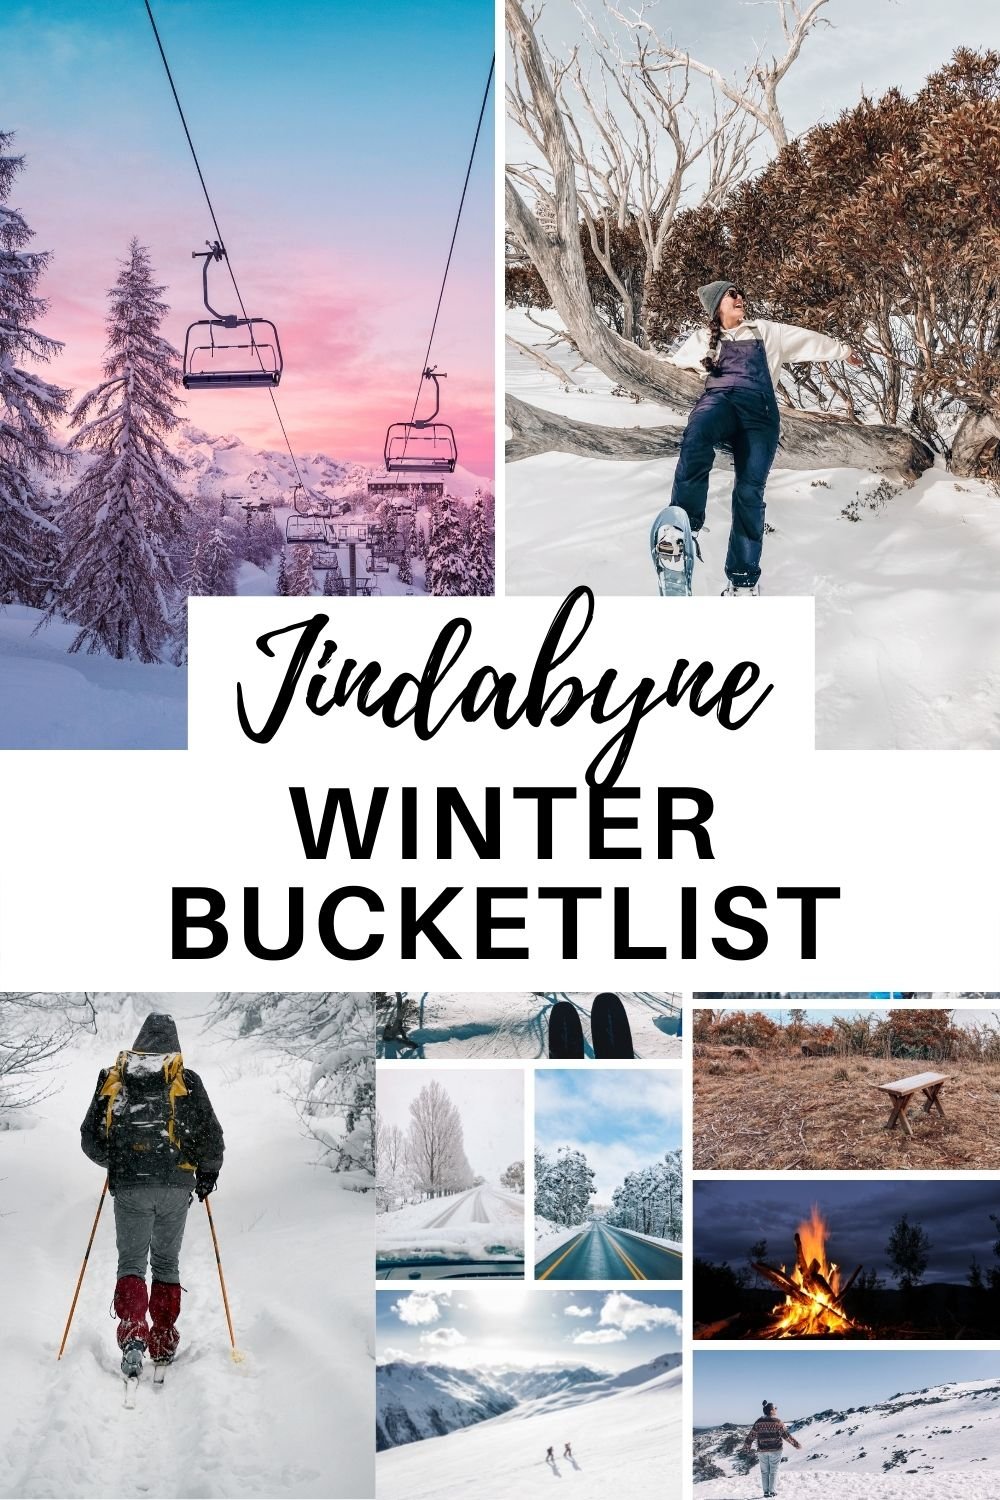 Jindabyne Winter Bucketlist- Everything you should do in Jindabyne in winter including skiing, snowboarding, hiking along Australia's alps, snowshoeing, where to stay, and what to eat